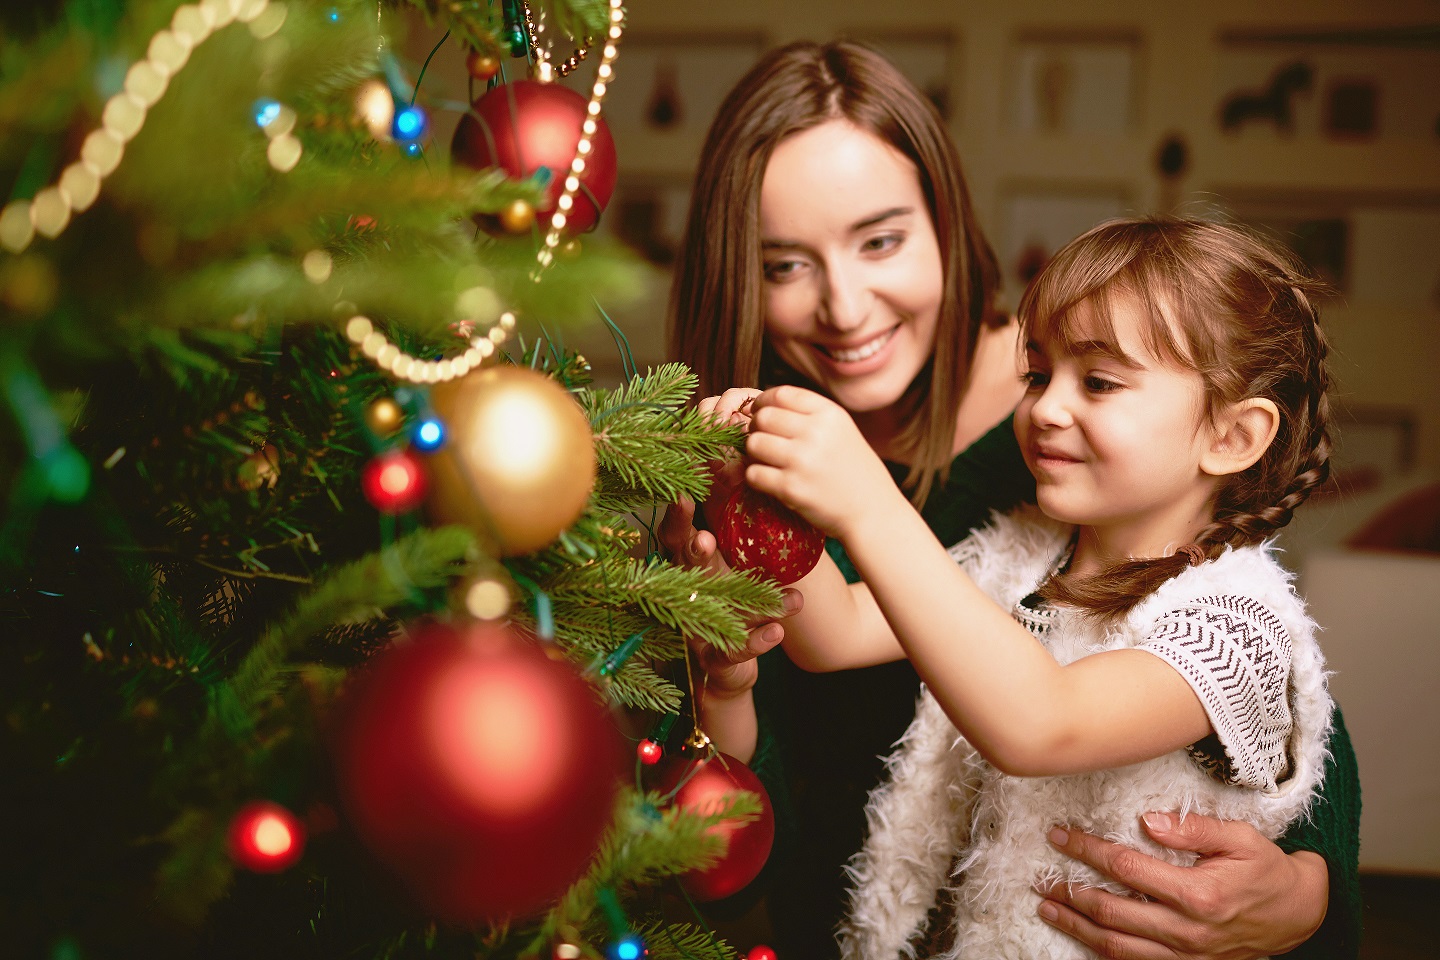 Santa Claus is coming, but have you sorted your Christmas parenting arrangements?